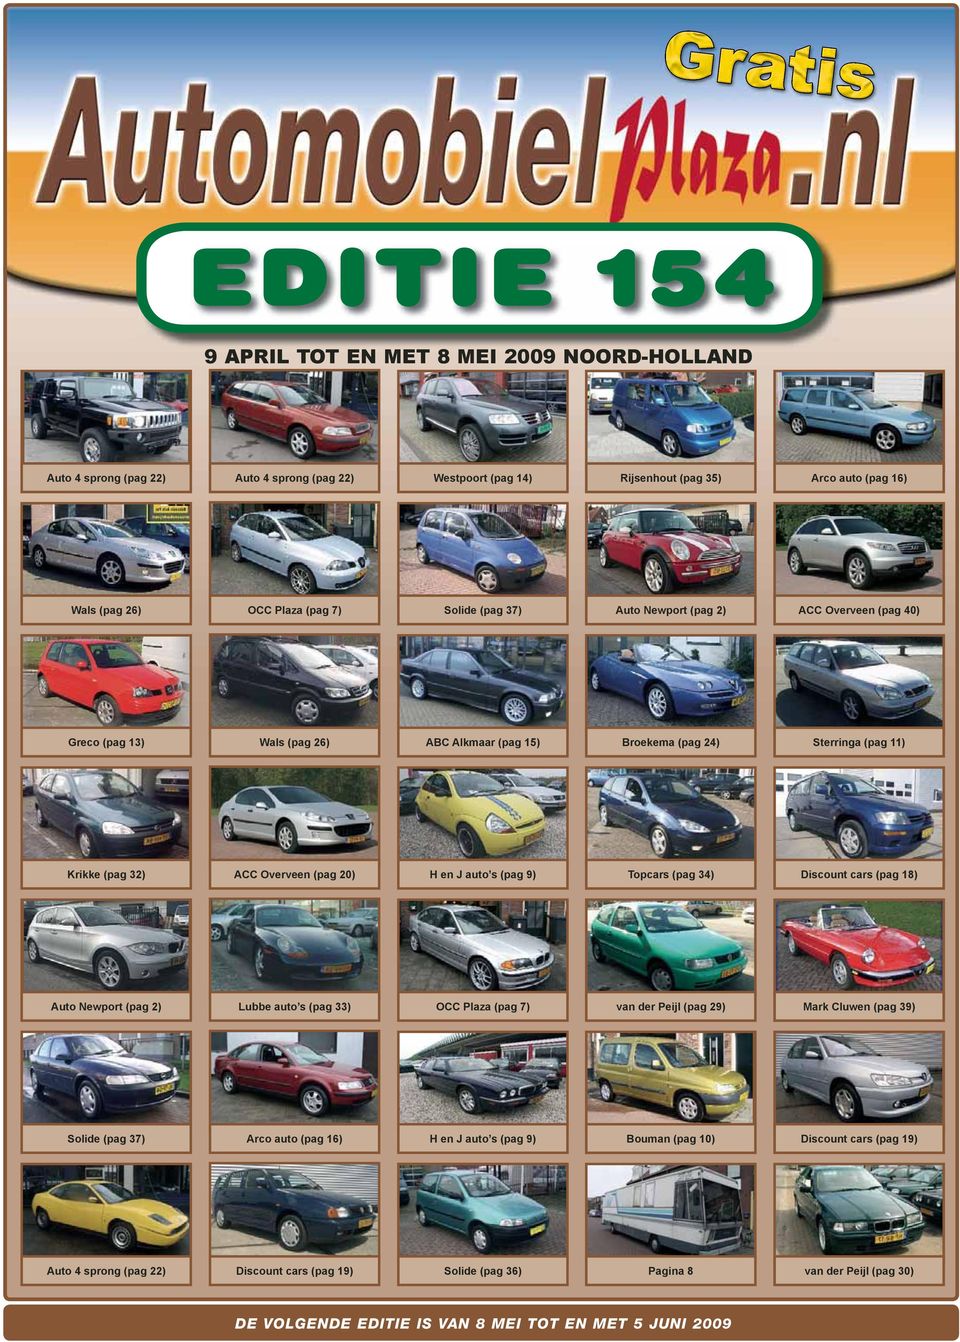 s (pag 9) Topcars (pag 34) Discount cars (pag 18) Auto Newport (pag 2) Lubbe auto s (pag 33) OCC Plaza (pag 7) van der Peijl (pag 29) Mark Cluwen (pag 39) Solide (pag 37) Arco auto (pag 16) H en J